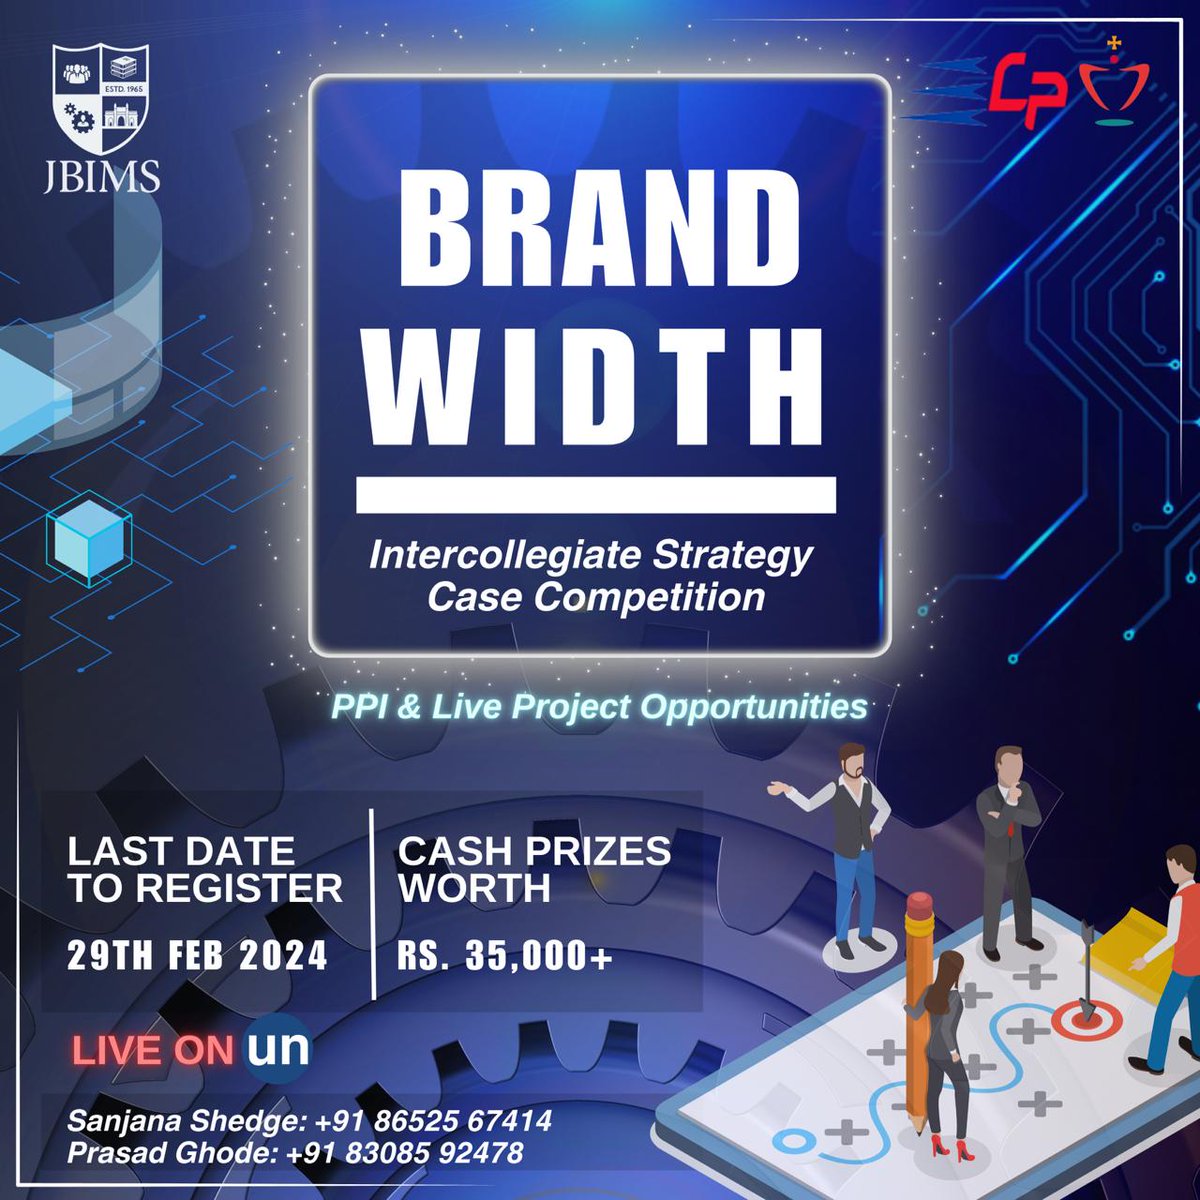 Hey Superstars!

The JBIMS Marketing Club presents An Intercollegiate Strategy Case Competition - *BRANDWIDTH* - not just for epic Marketeers, but Finance and Operations wizards too! 💡

💸 One of the best parts? You stand a chance to win cash rewards worth more than 35K!